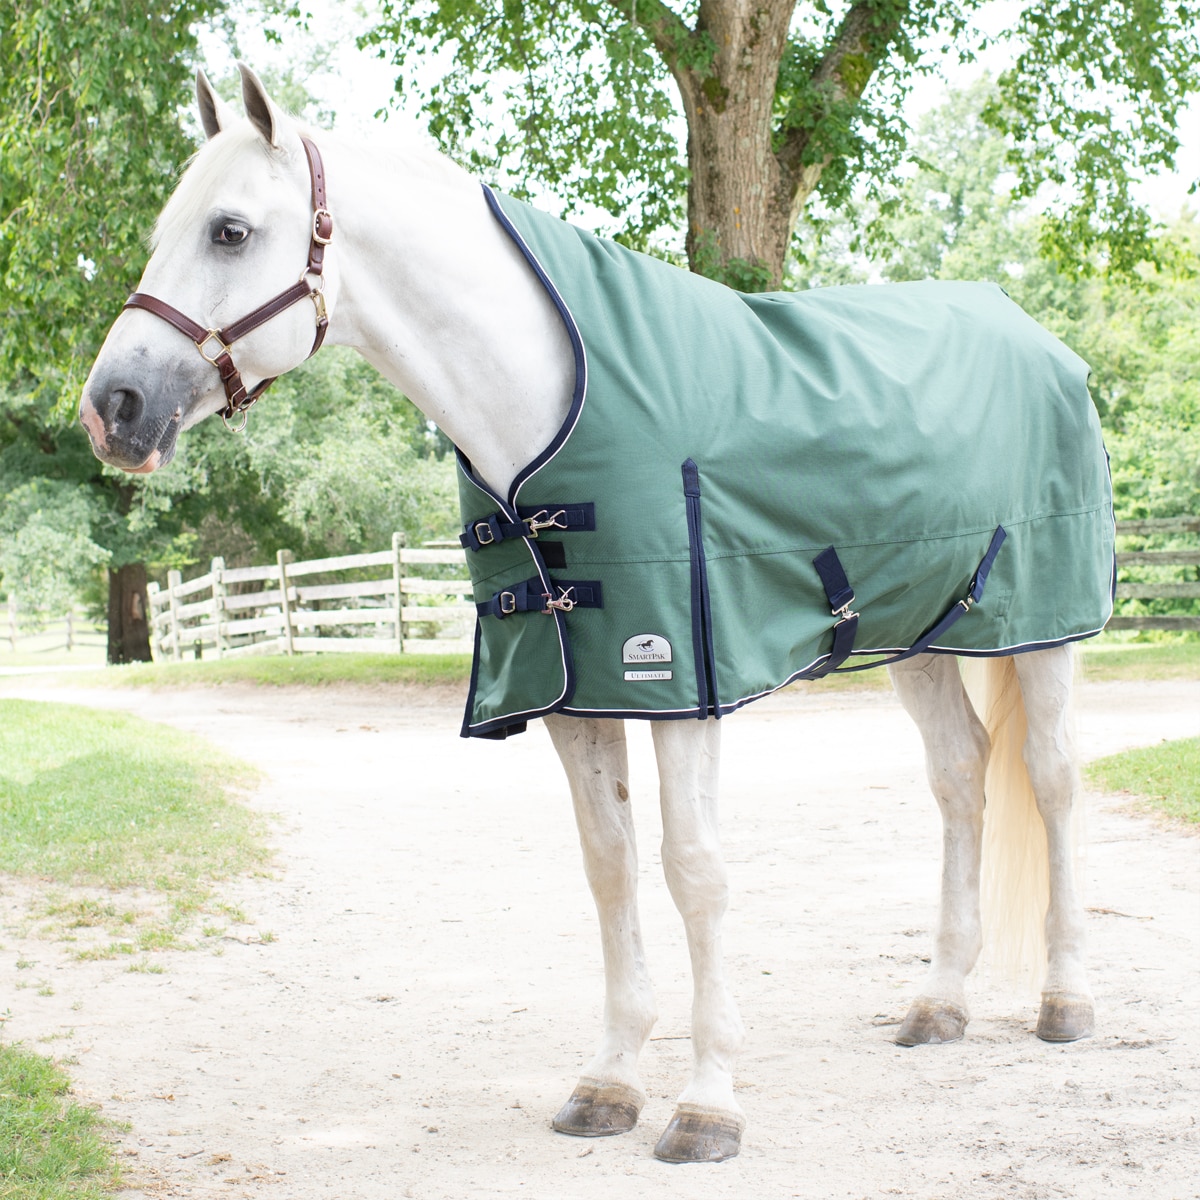 200g COMBO NECK TURNOUT RUGShires Tempest Medium Weight WINTER HORSE RUG 